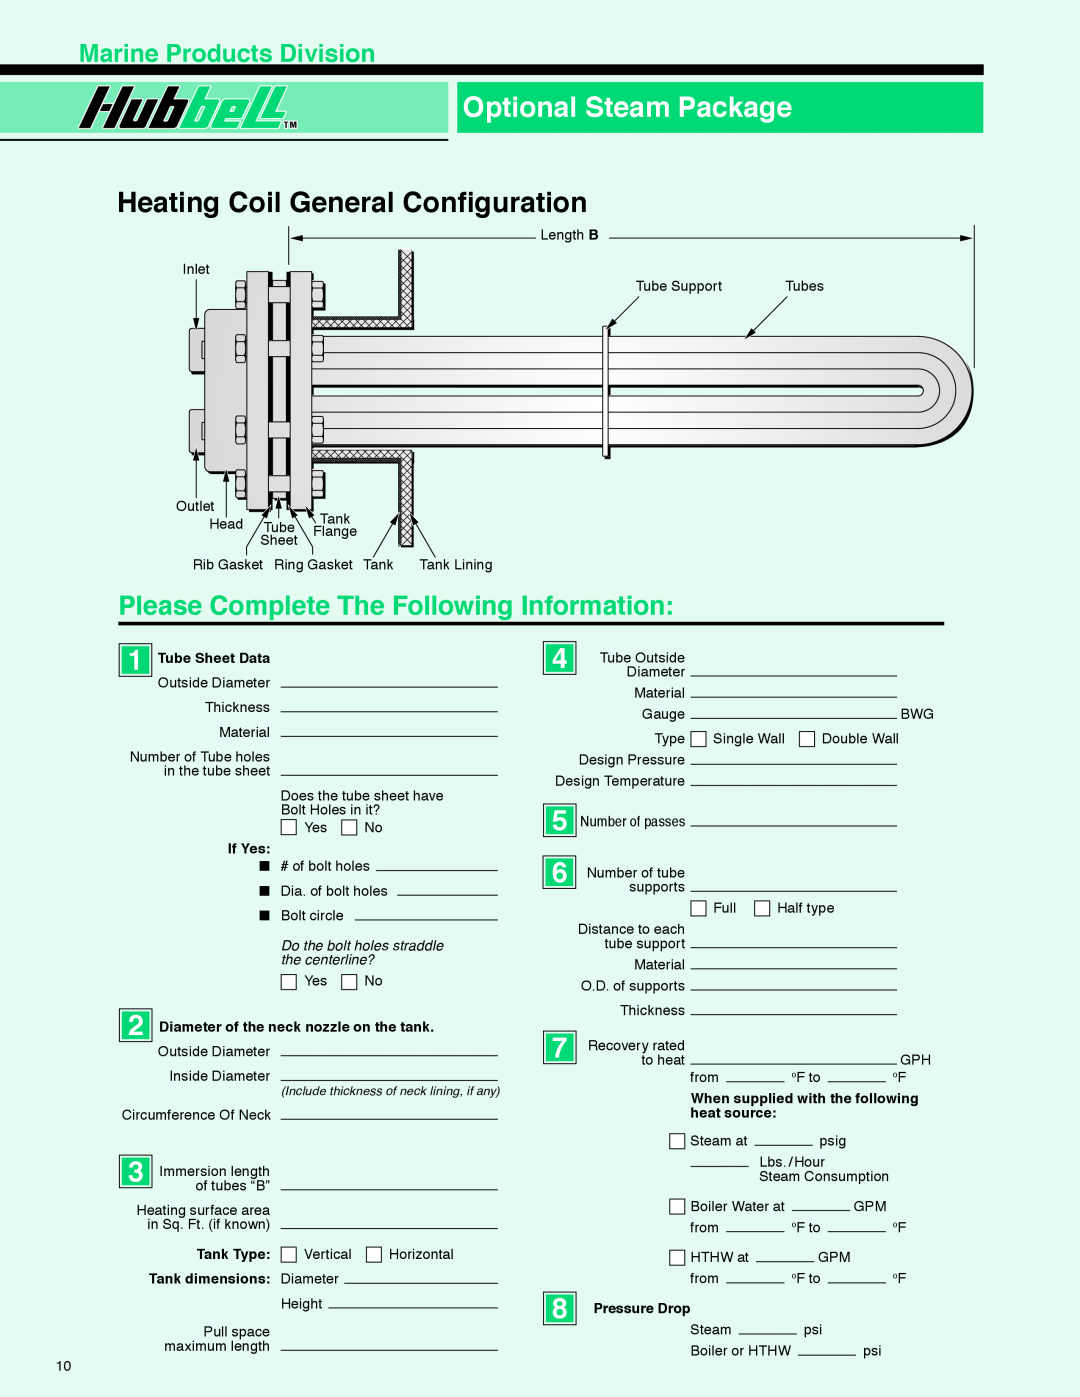 Hubbell MSH, MH manual Heating Coil General Configuration, MarineProductsDivisionDivision, Optional Steam Package, If Yes 